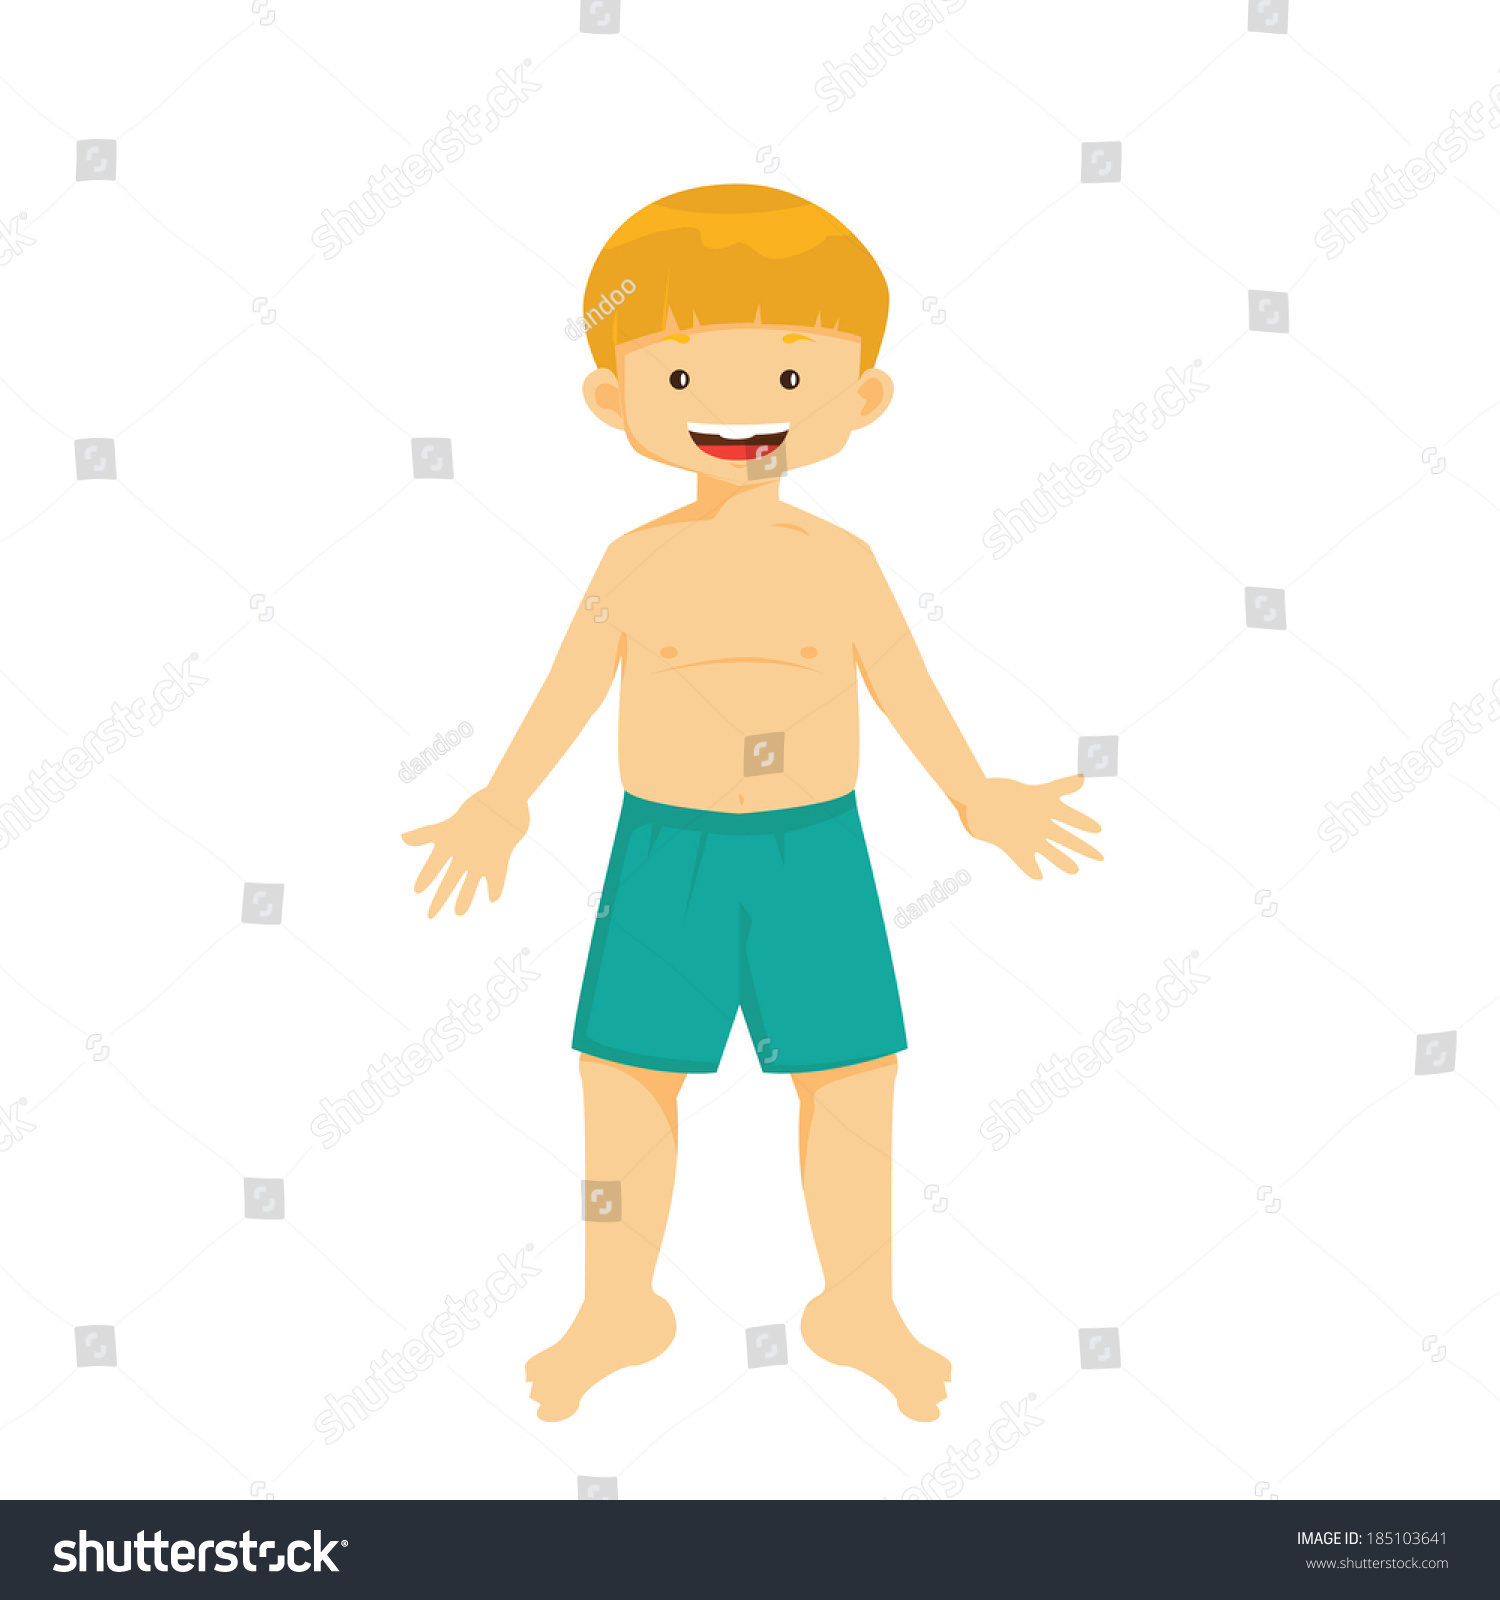 Shirtless Kid Young Boy With Healthy Body Stock Vector 185103641 ...